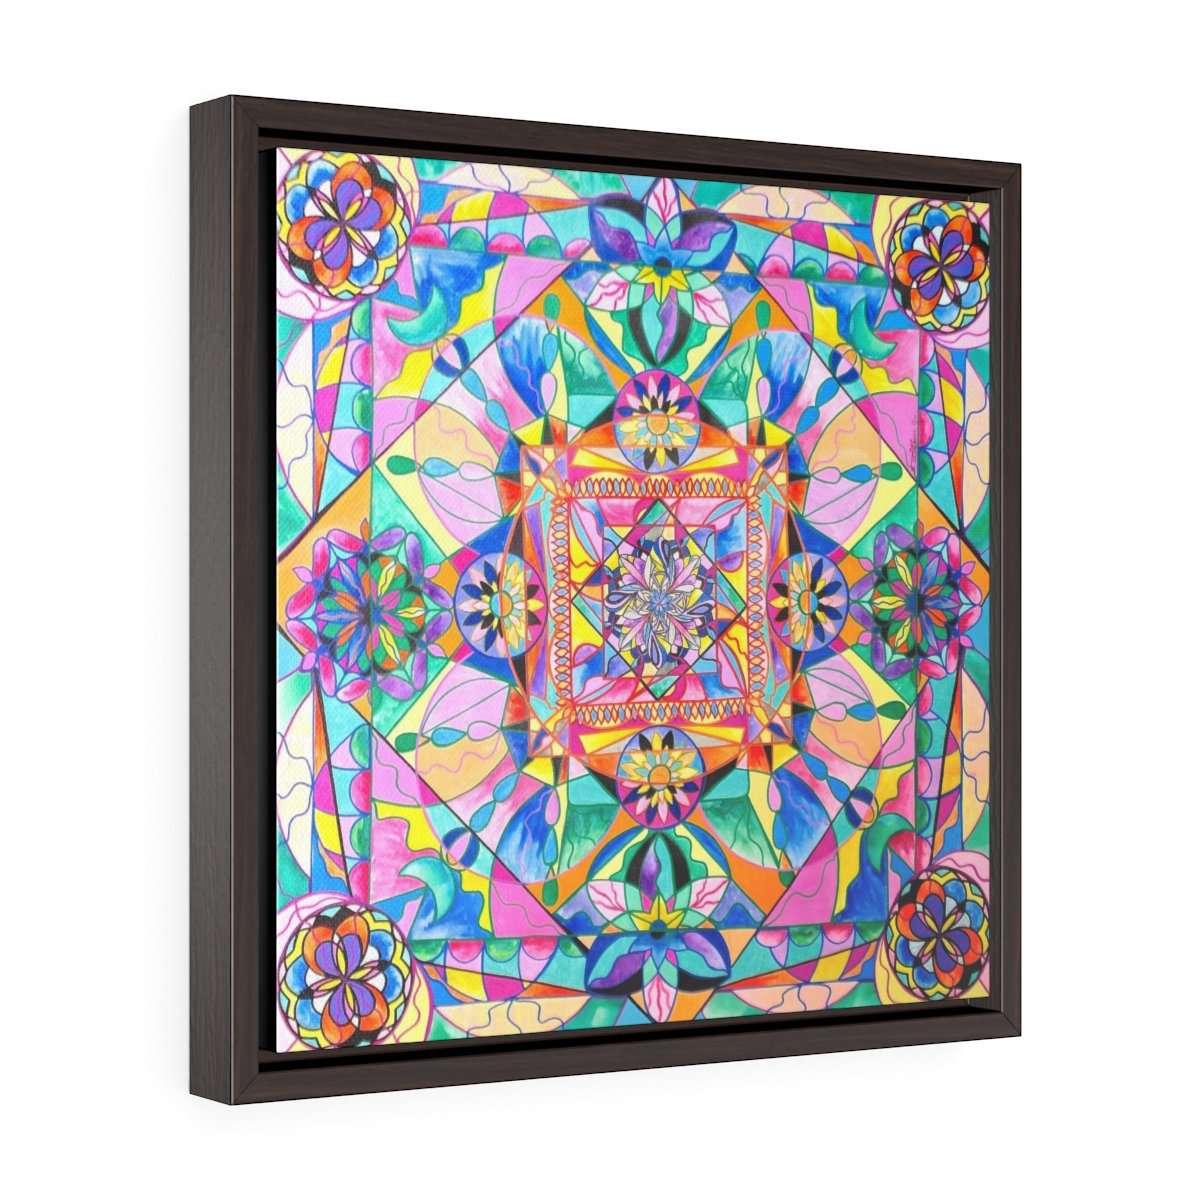 we-believe-in-helping-you-find-the-perfect-renewal-square-framed-premium-gallery-wrap-canvas-hot-on-sale_2.jpg